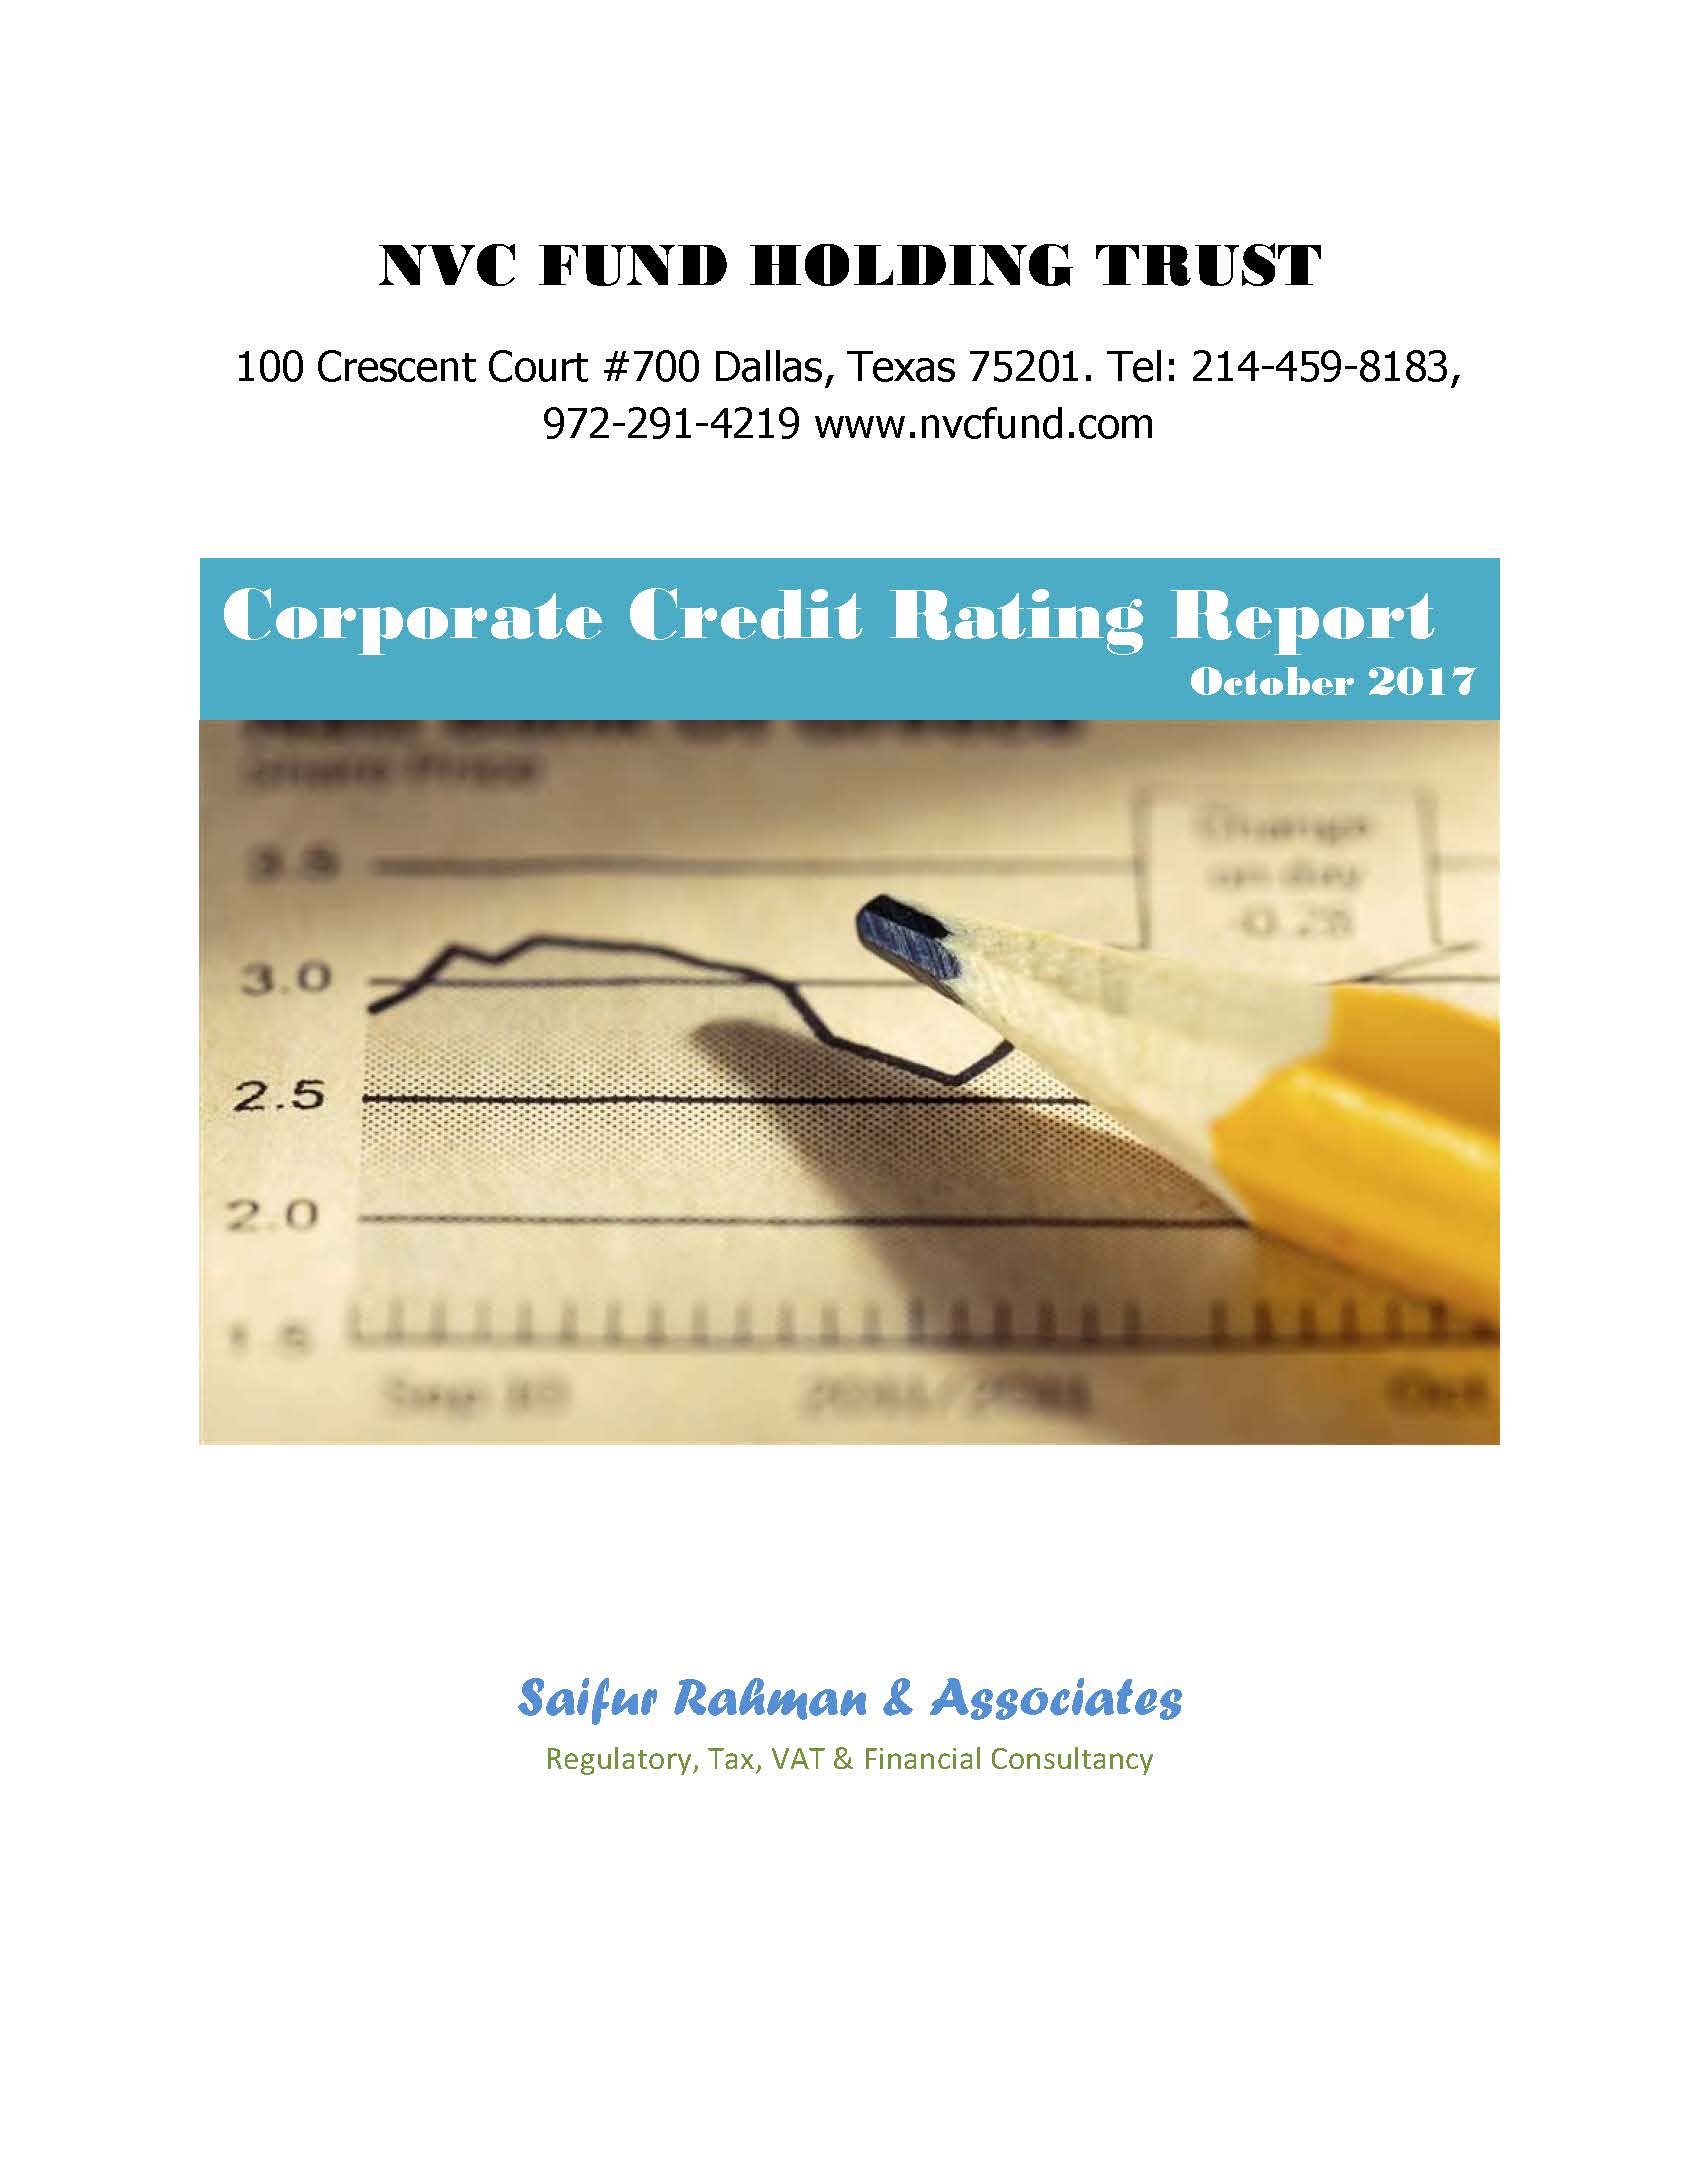 NVC_FUND HOLDINGS_CREDIT_RATING REPORT (1)_Page_01.jpg